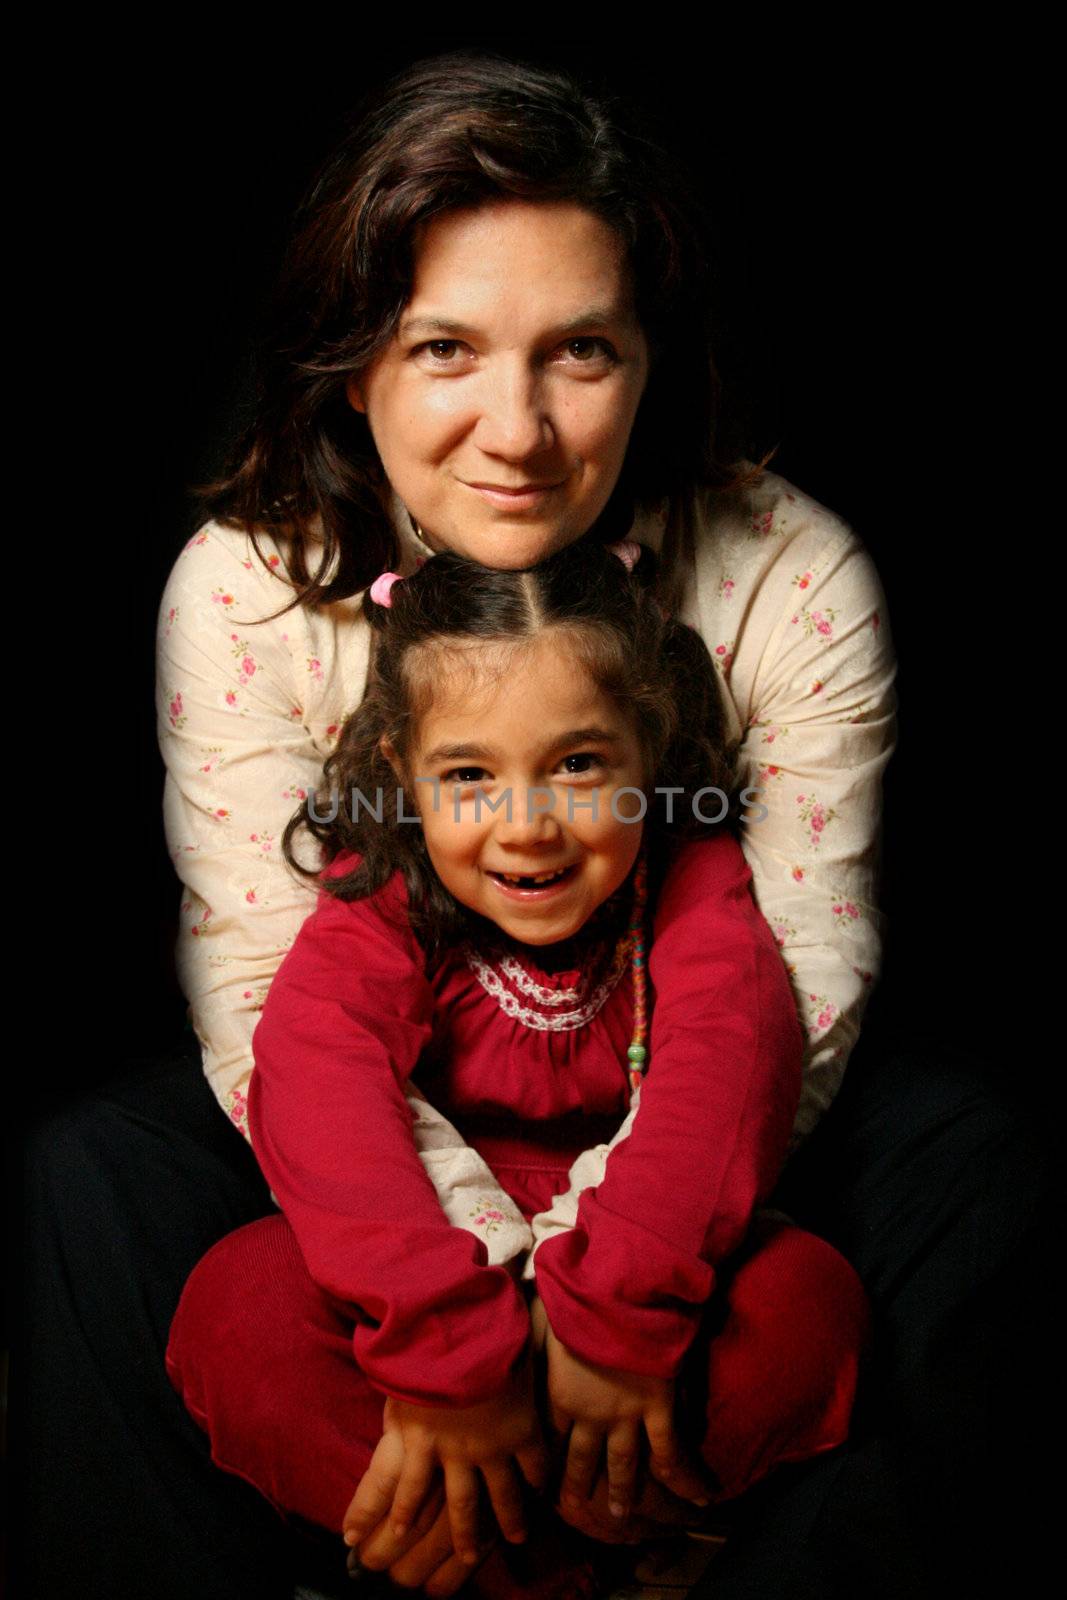 mother and daughter by jpcasais